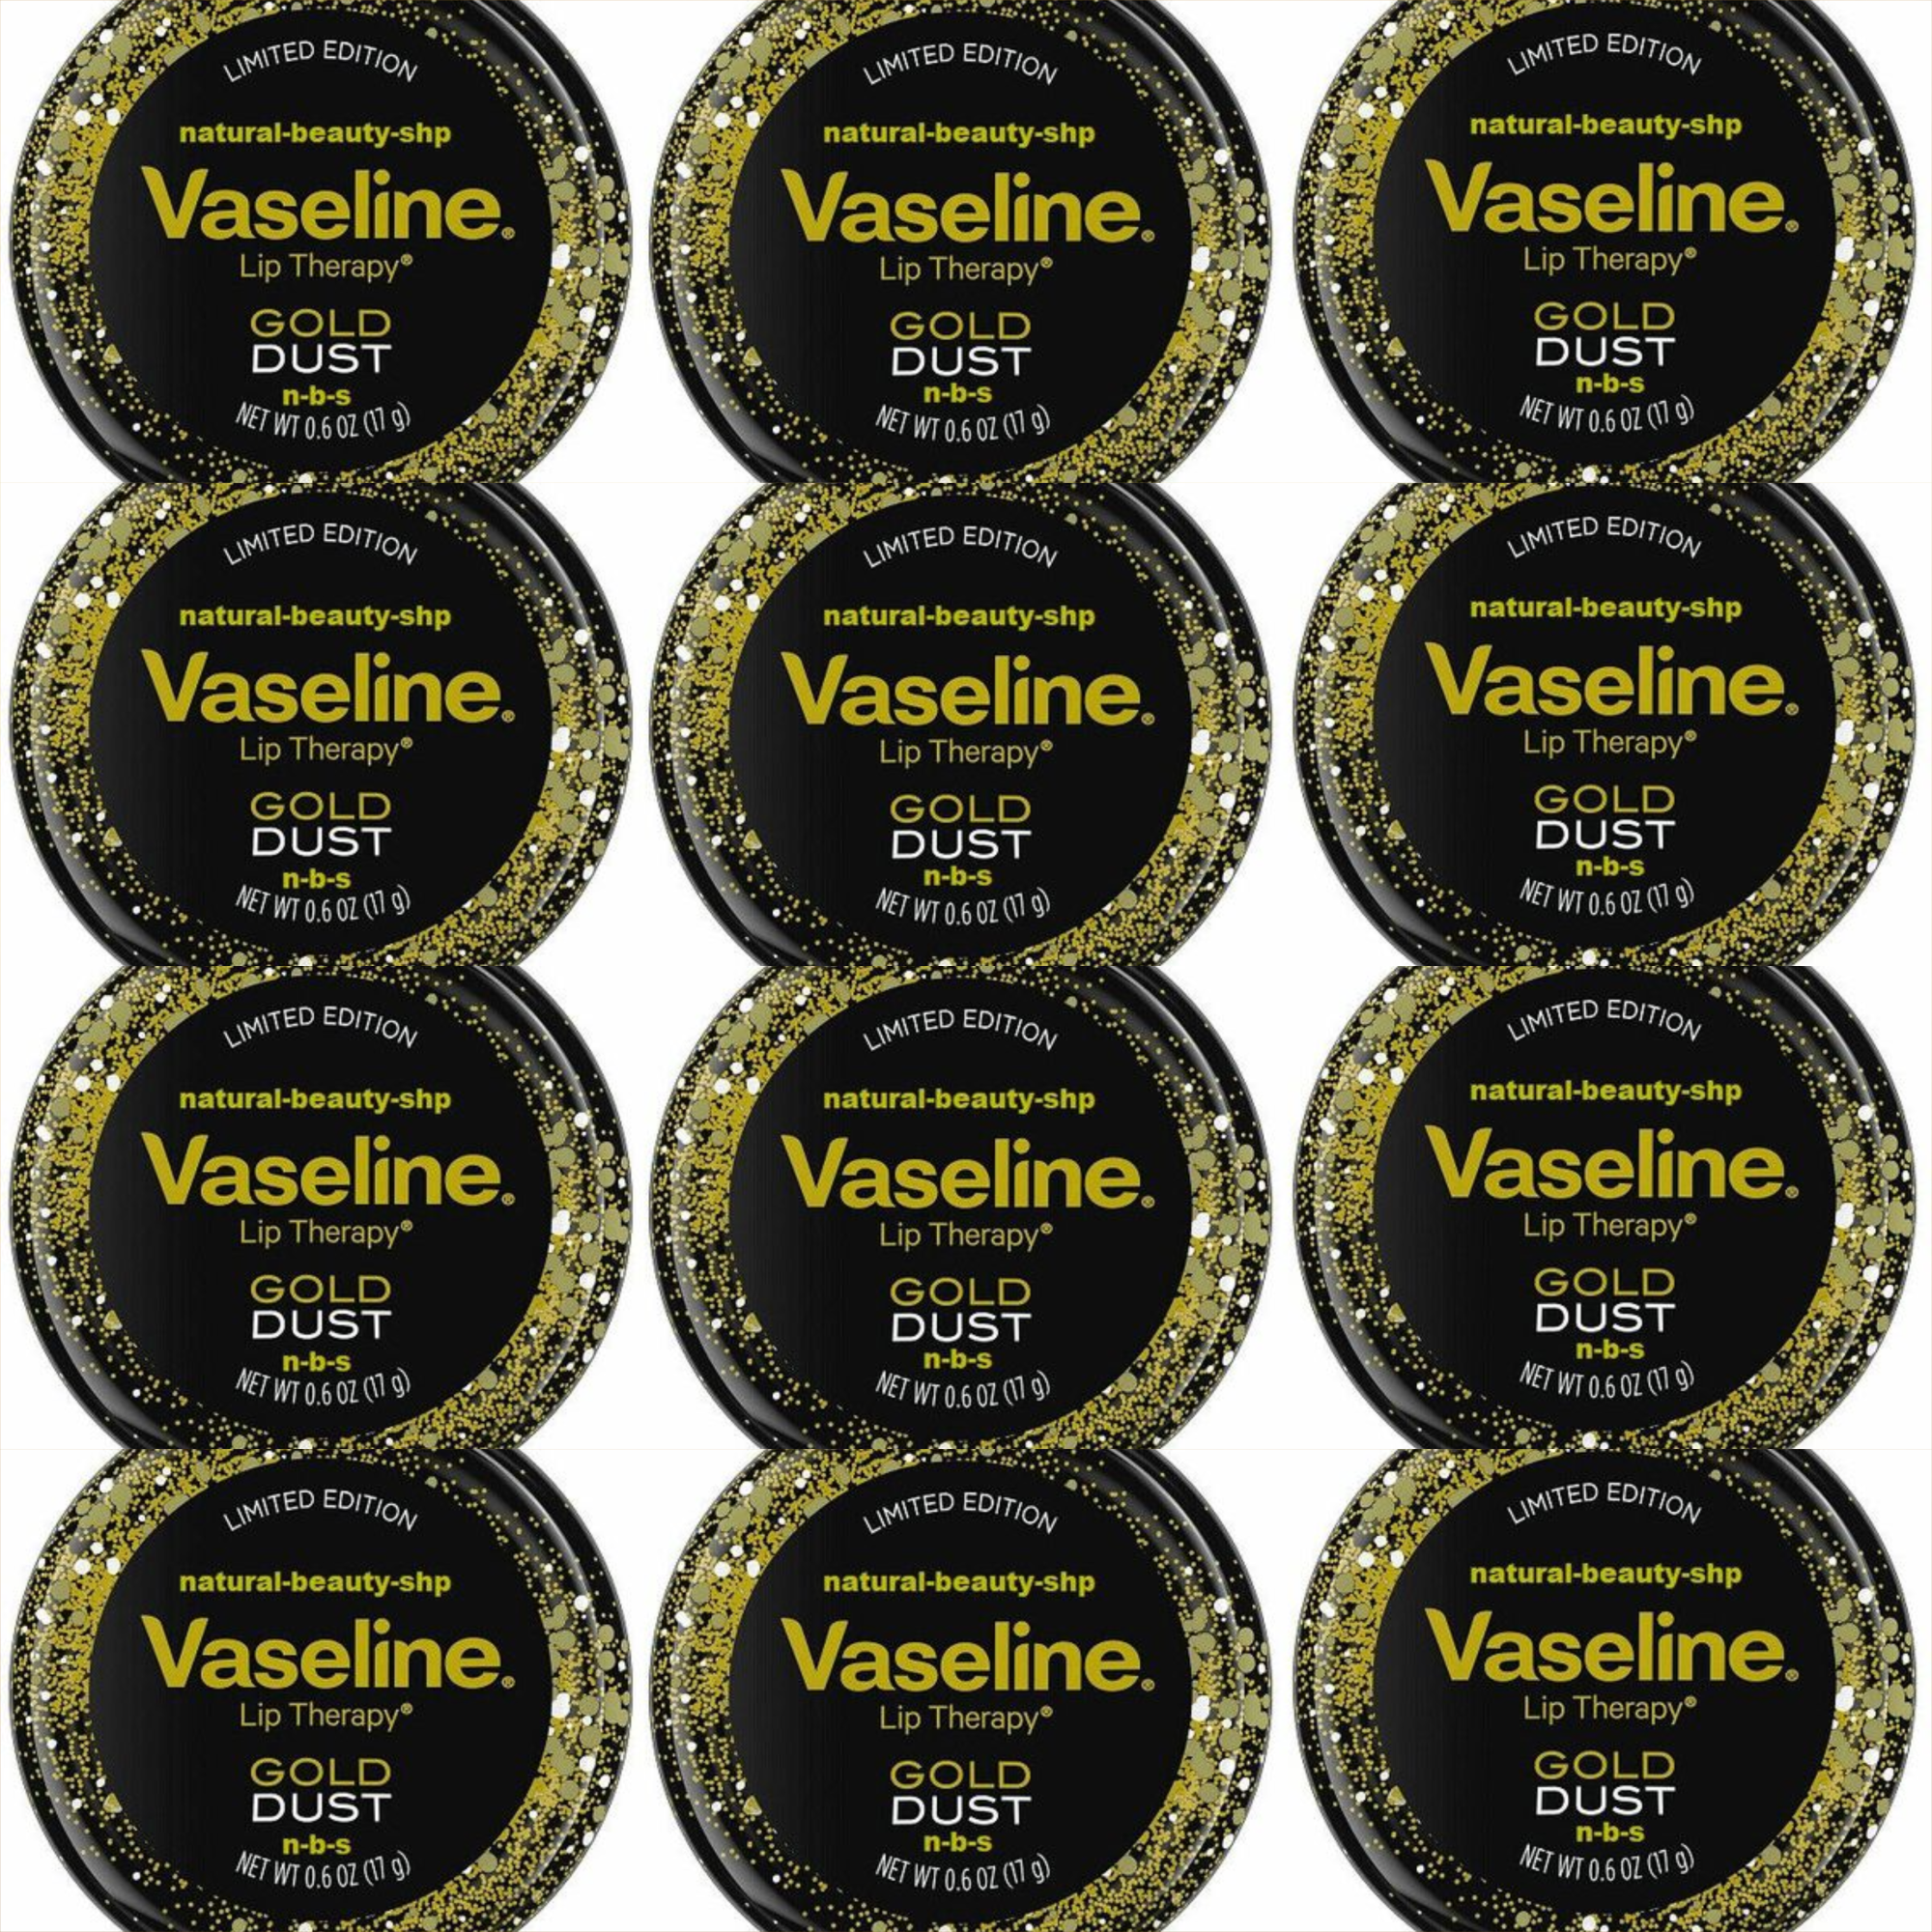 VASELINE LIP THERAPY GOLD DUST 17G (Pack of 12)